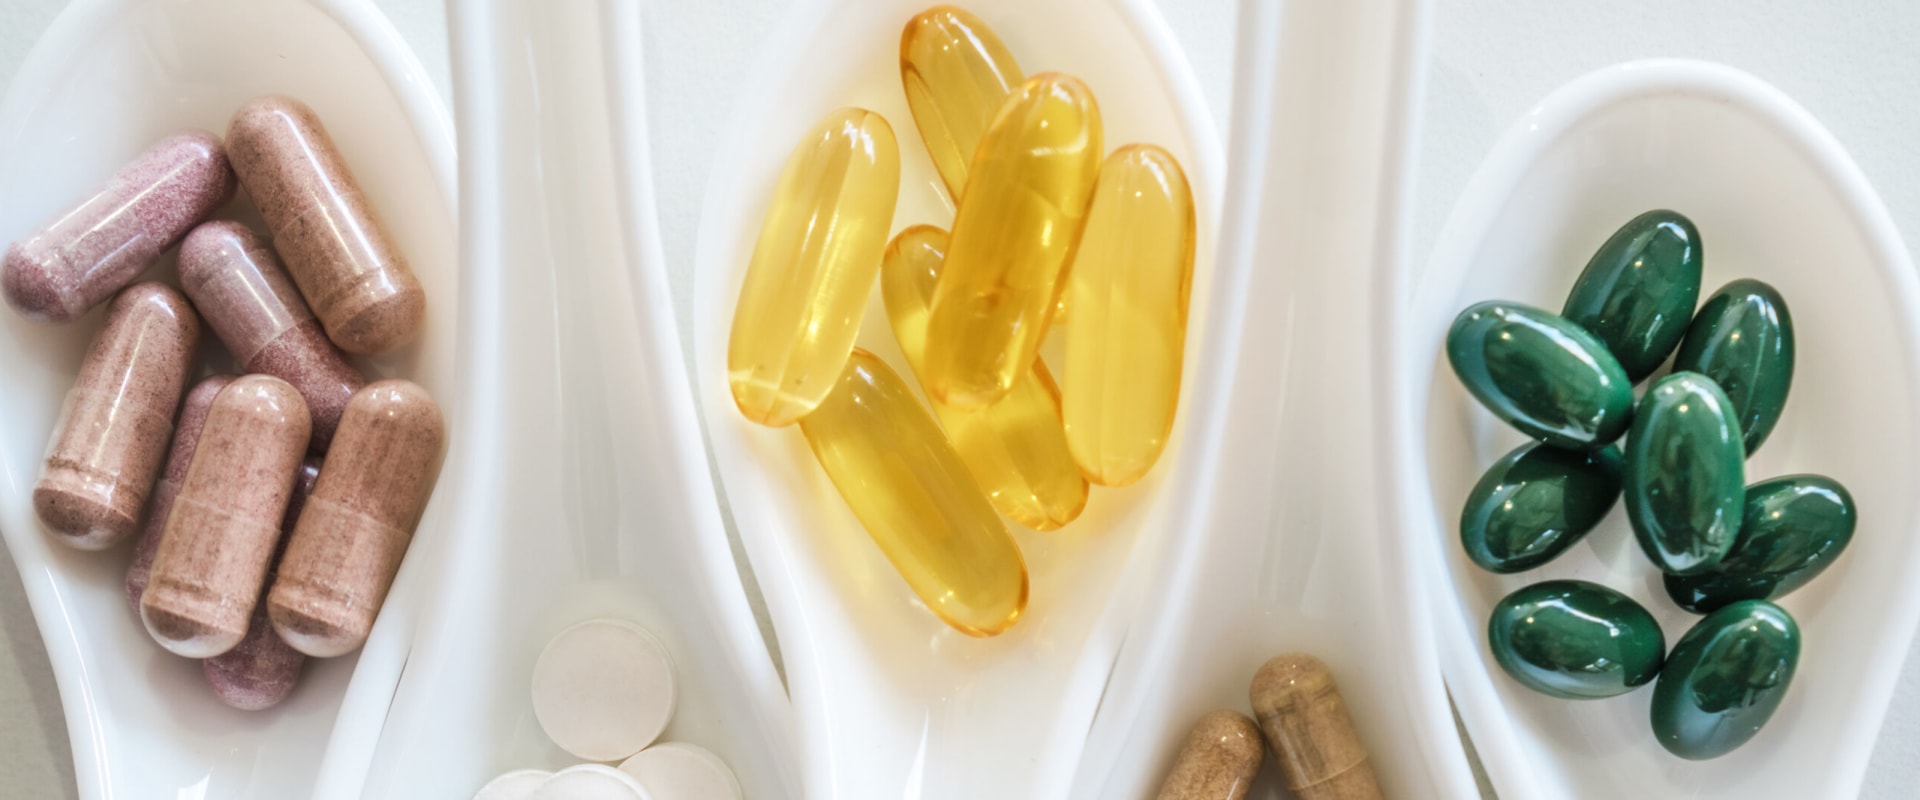 Are dietary supplements regulated?